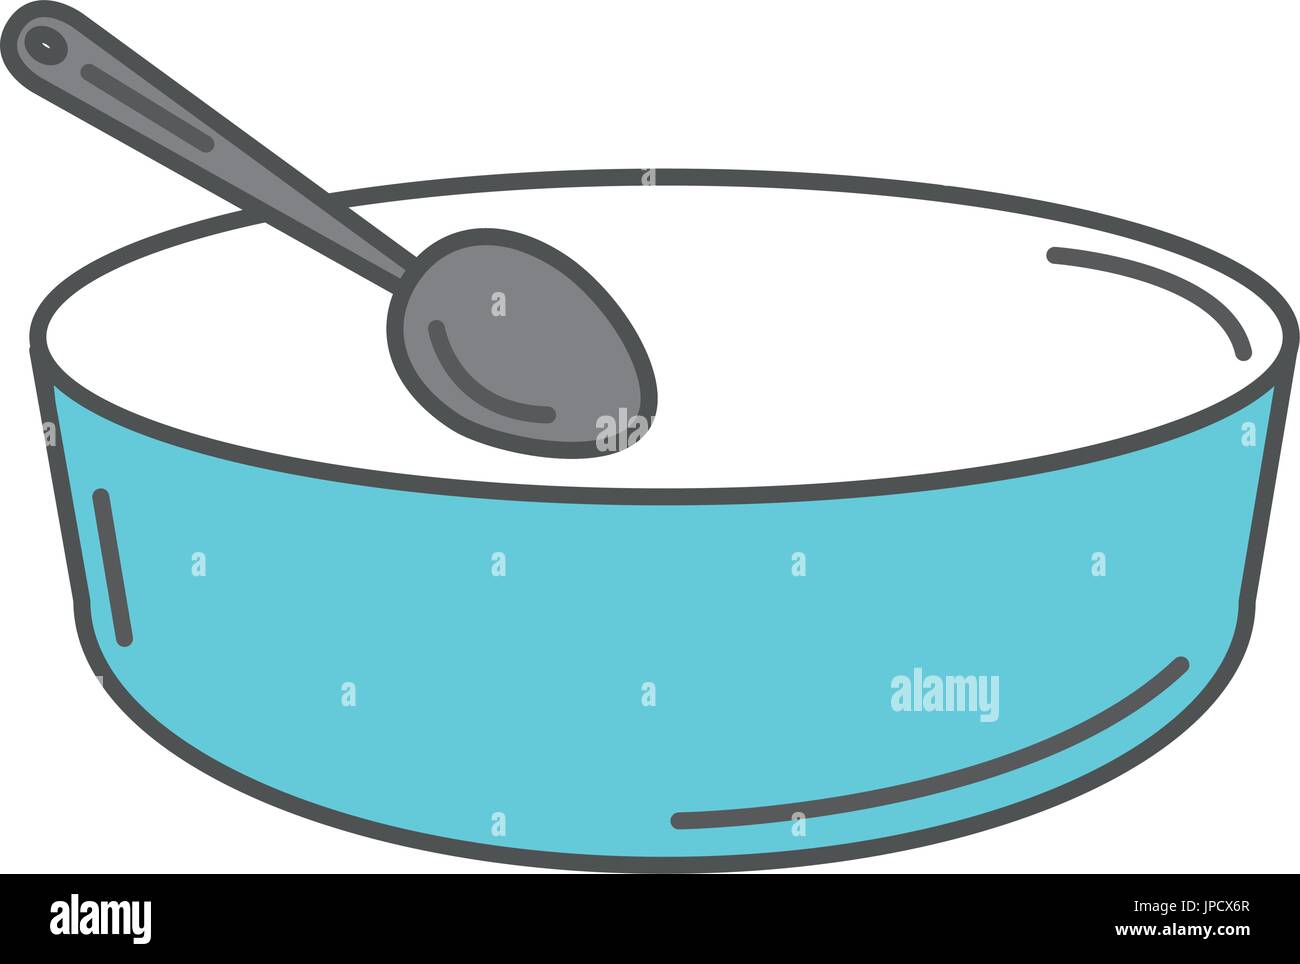 Deep Plate With Spoon Vector Illustration Design Stock Vector Image Art Alamy